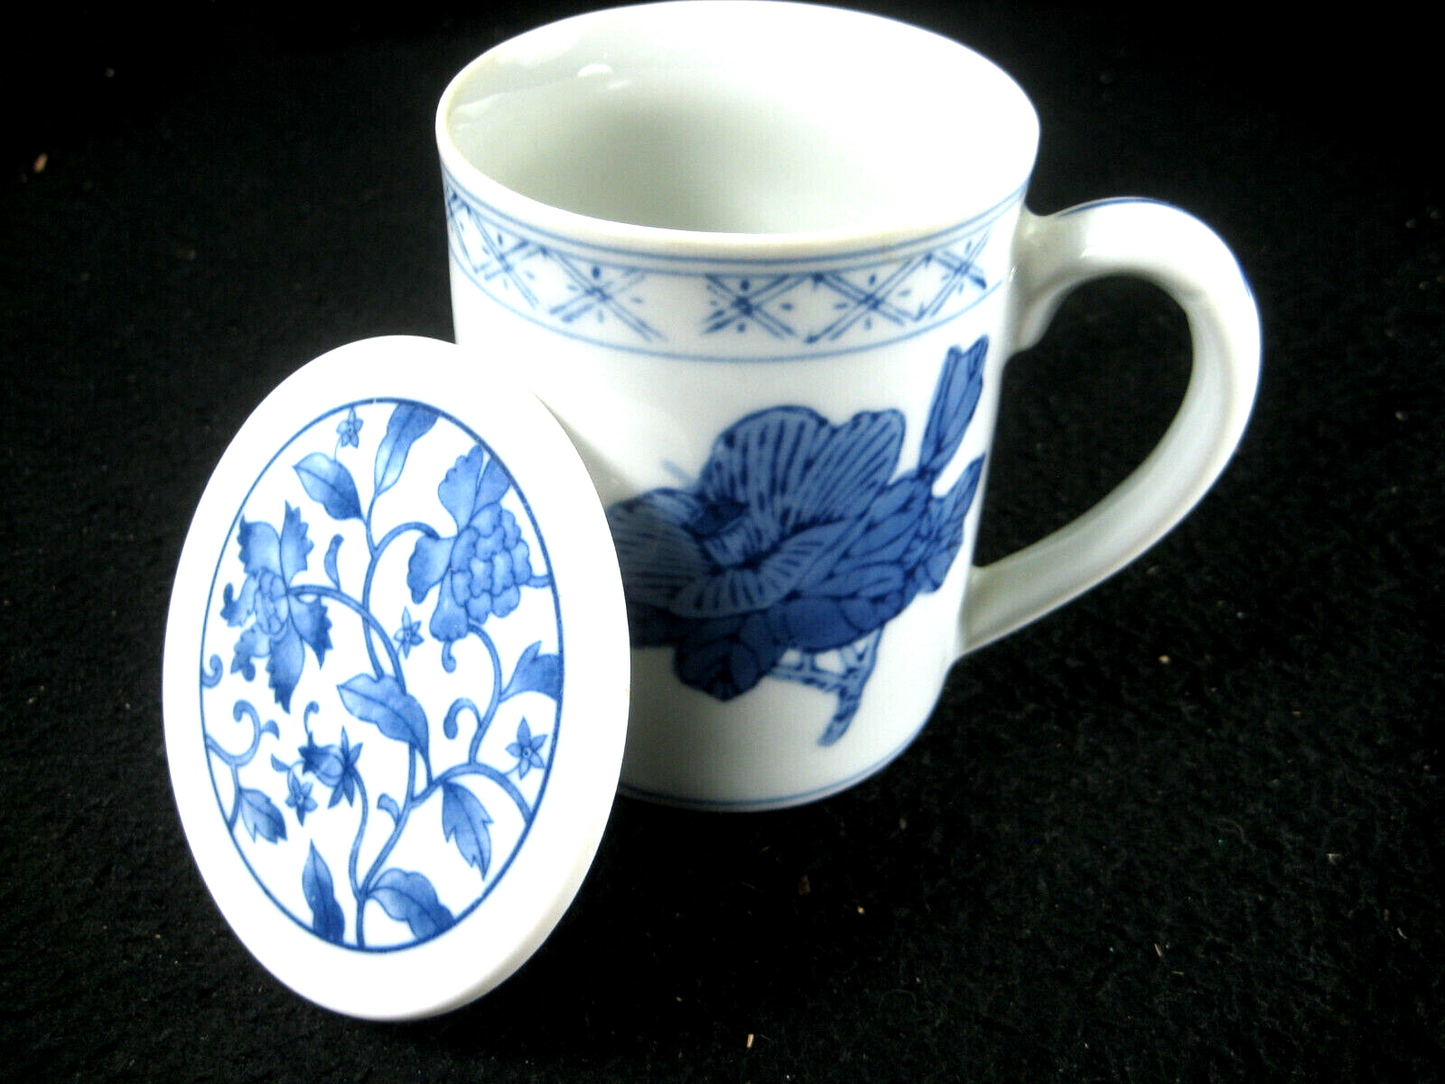 Vintage Imari Stenciled Covered Tea Cup With Handle & Fowers Ceramic Marked